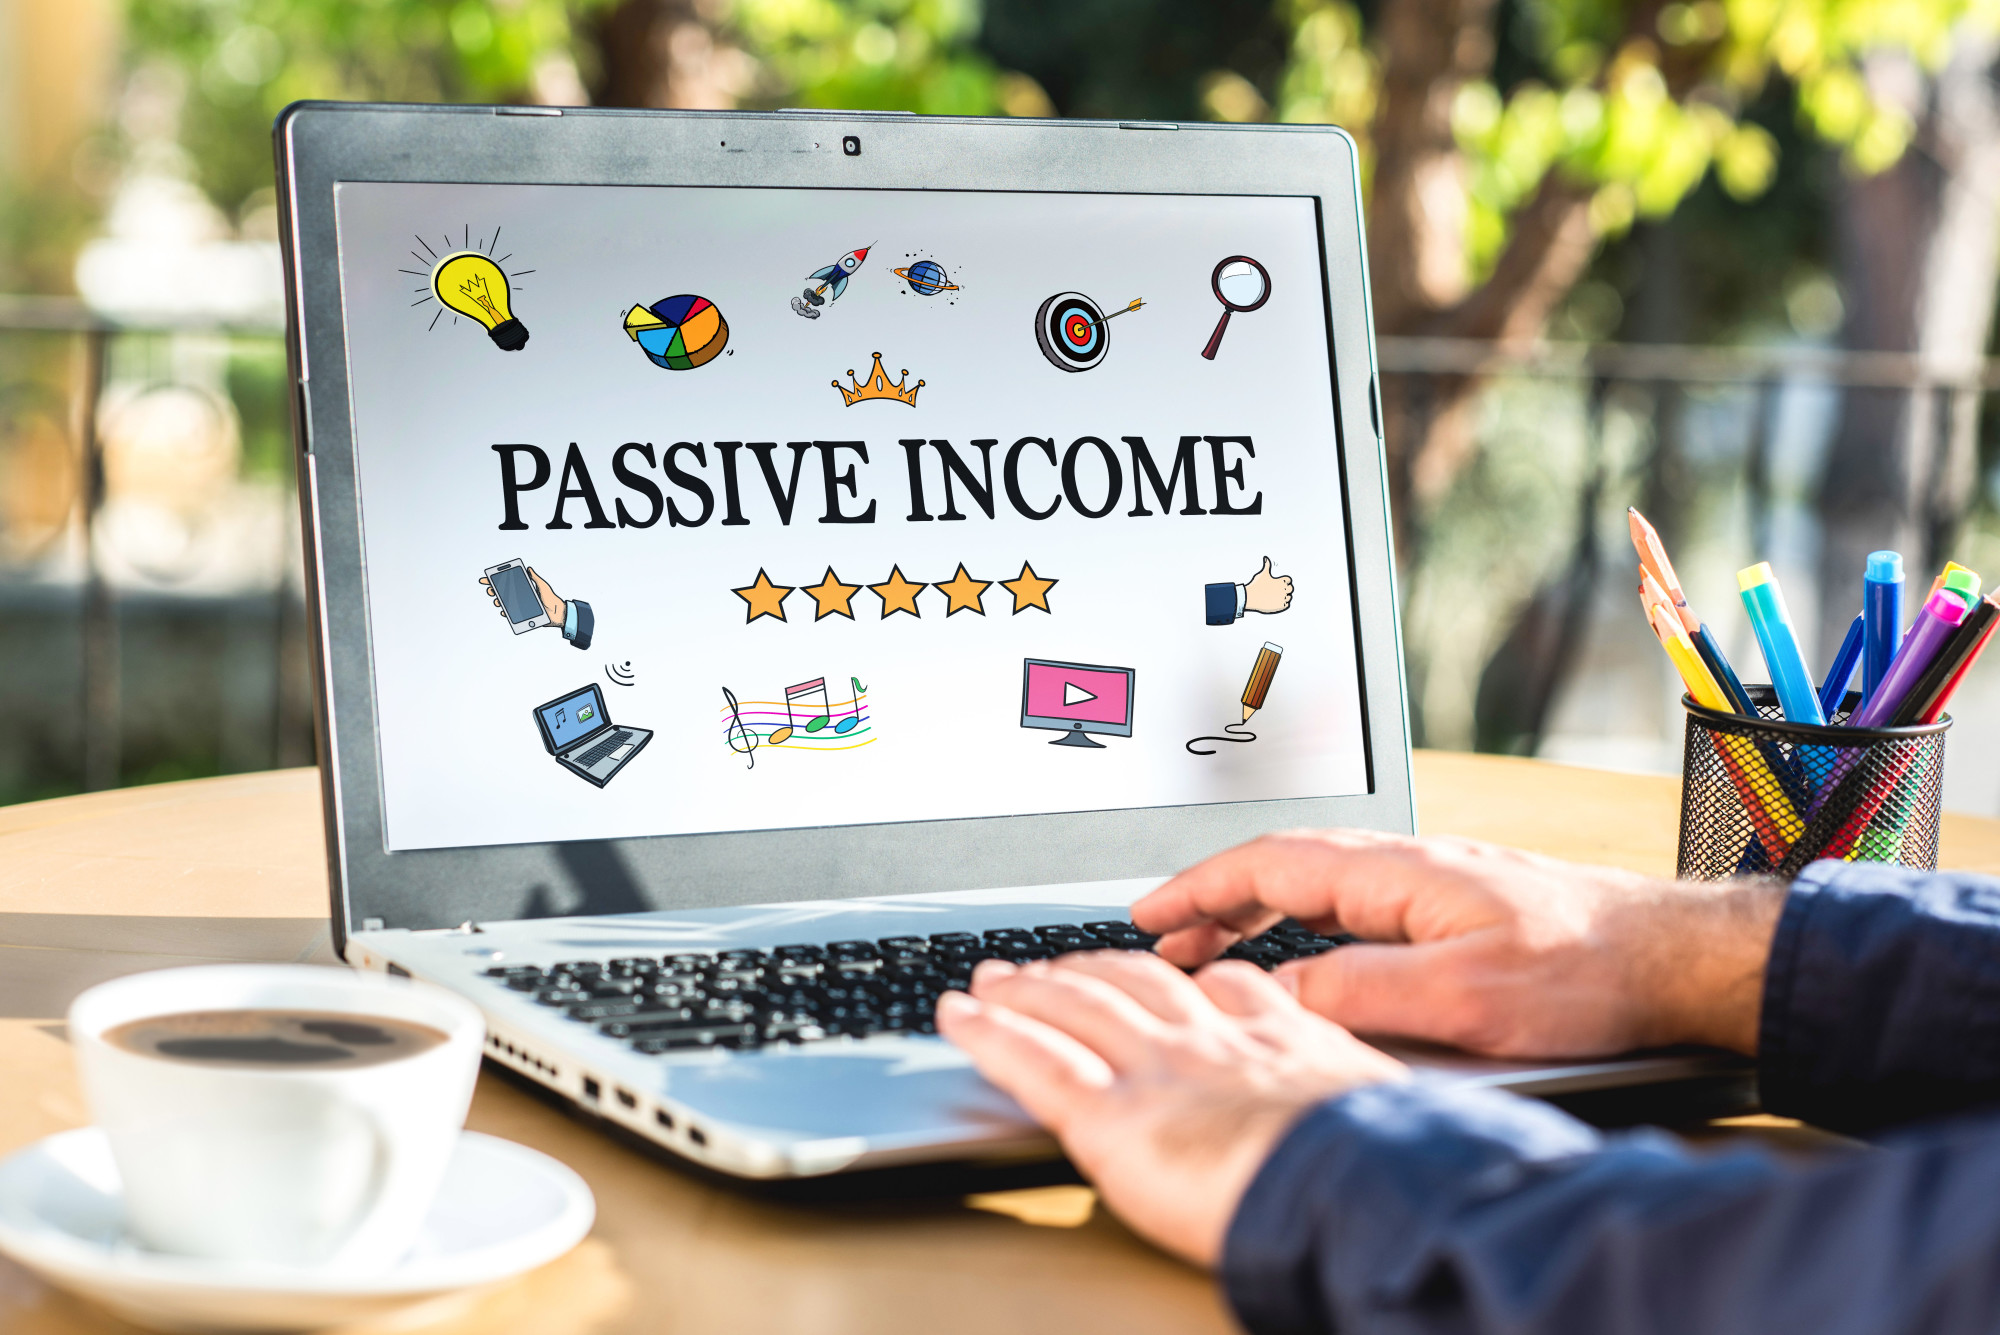 5 Passive Income Sources to Help You Build Wealth